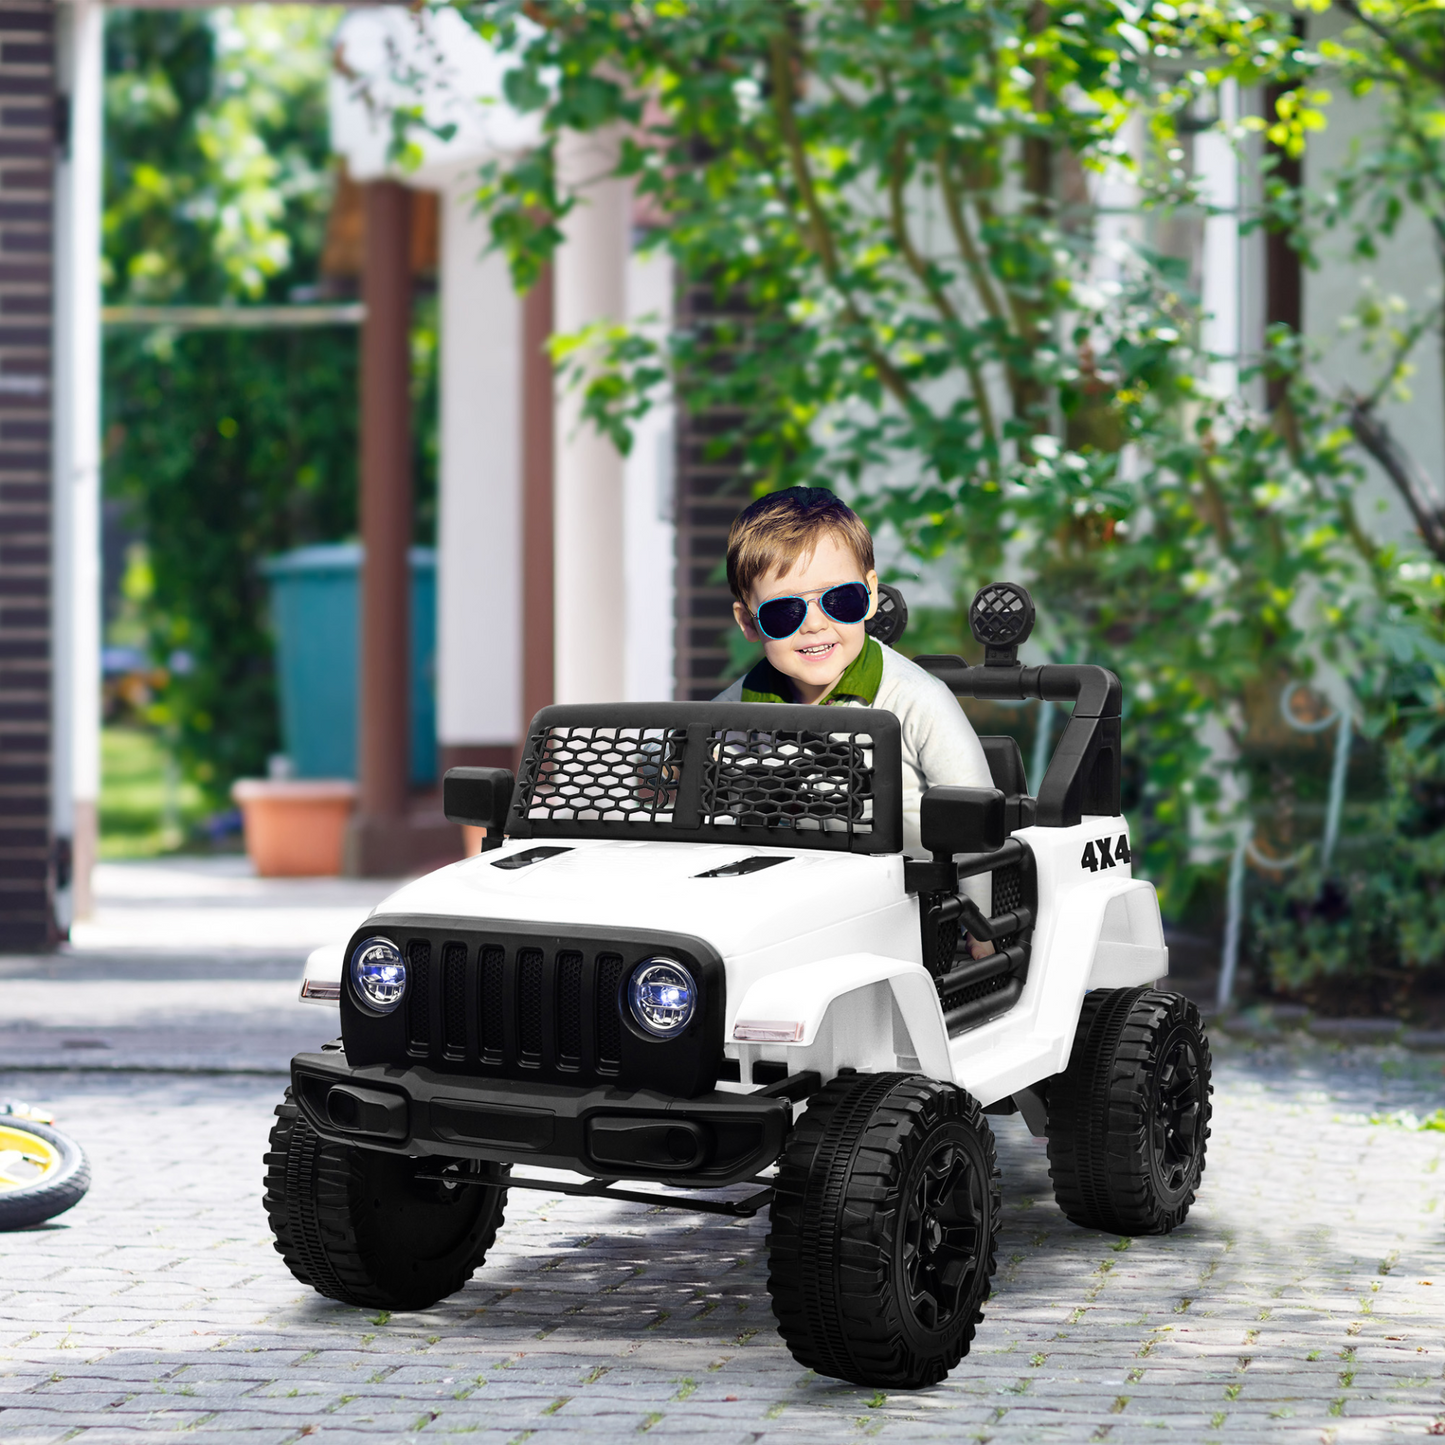 HOMCOM 12V Battery-powered 2 Motors Kids Electric Ride On Car Truck Off-road Toy with Parental Remote Control Horn Lights Suspension Wheels for 3-6 Years Old White